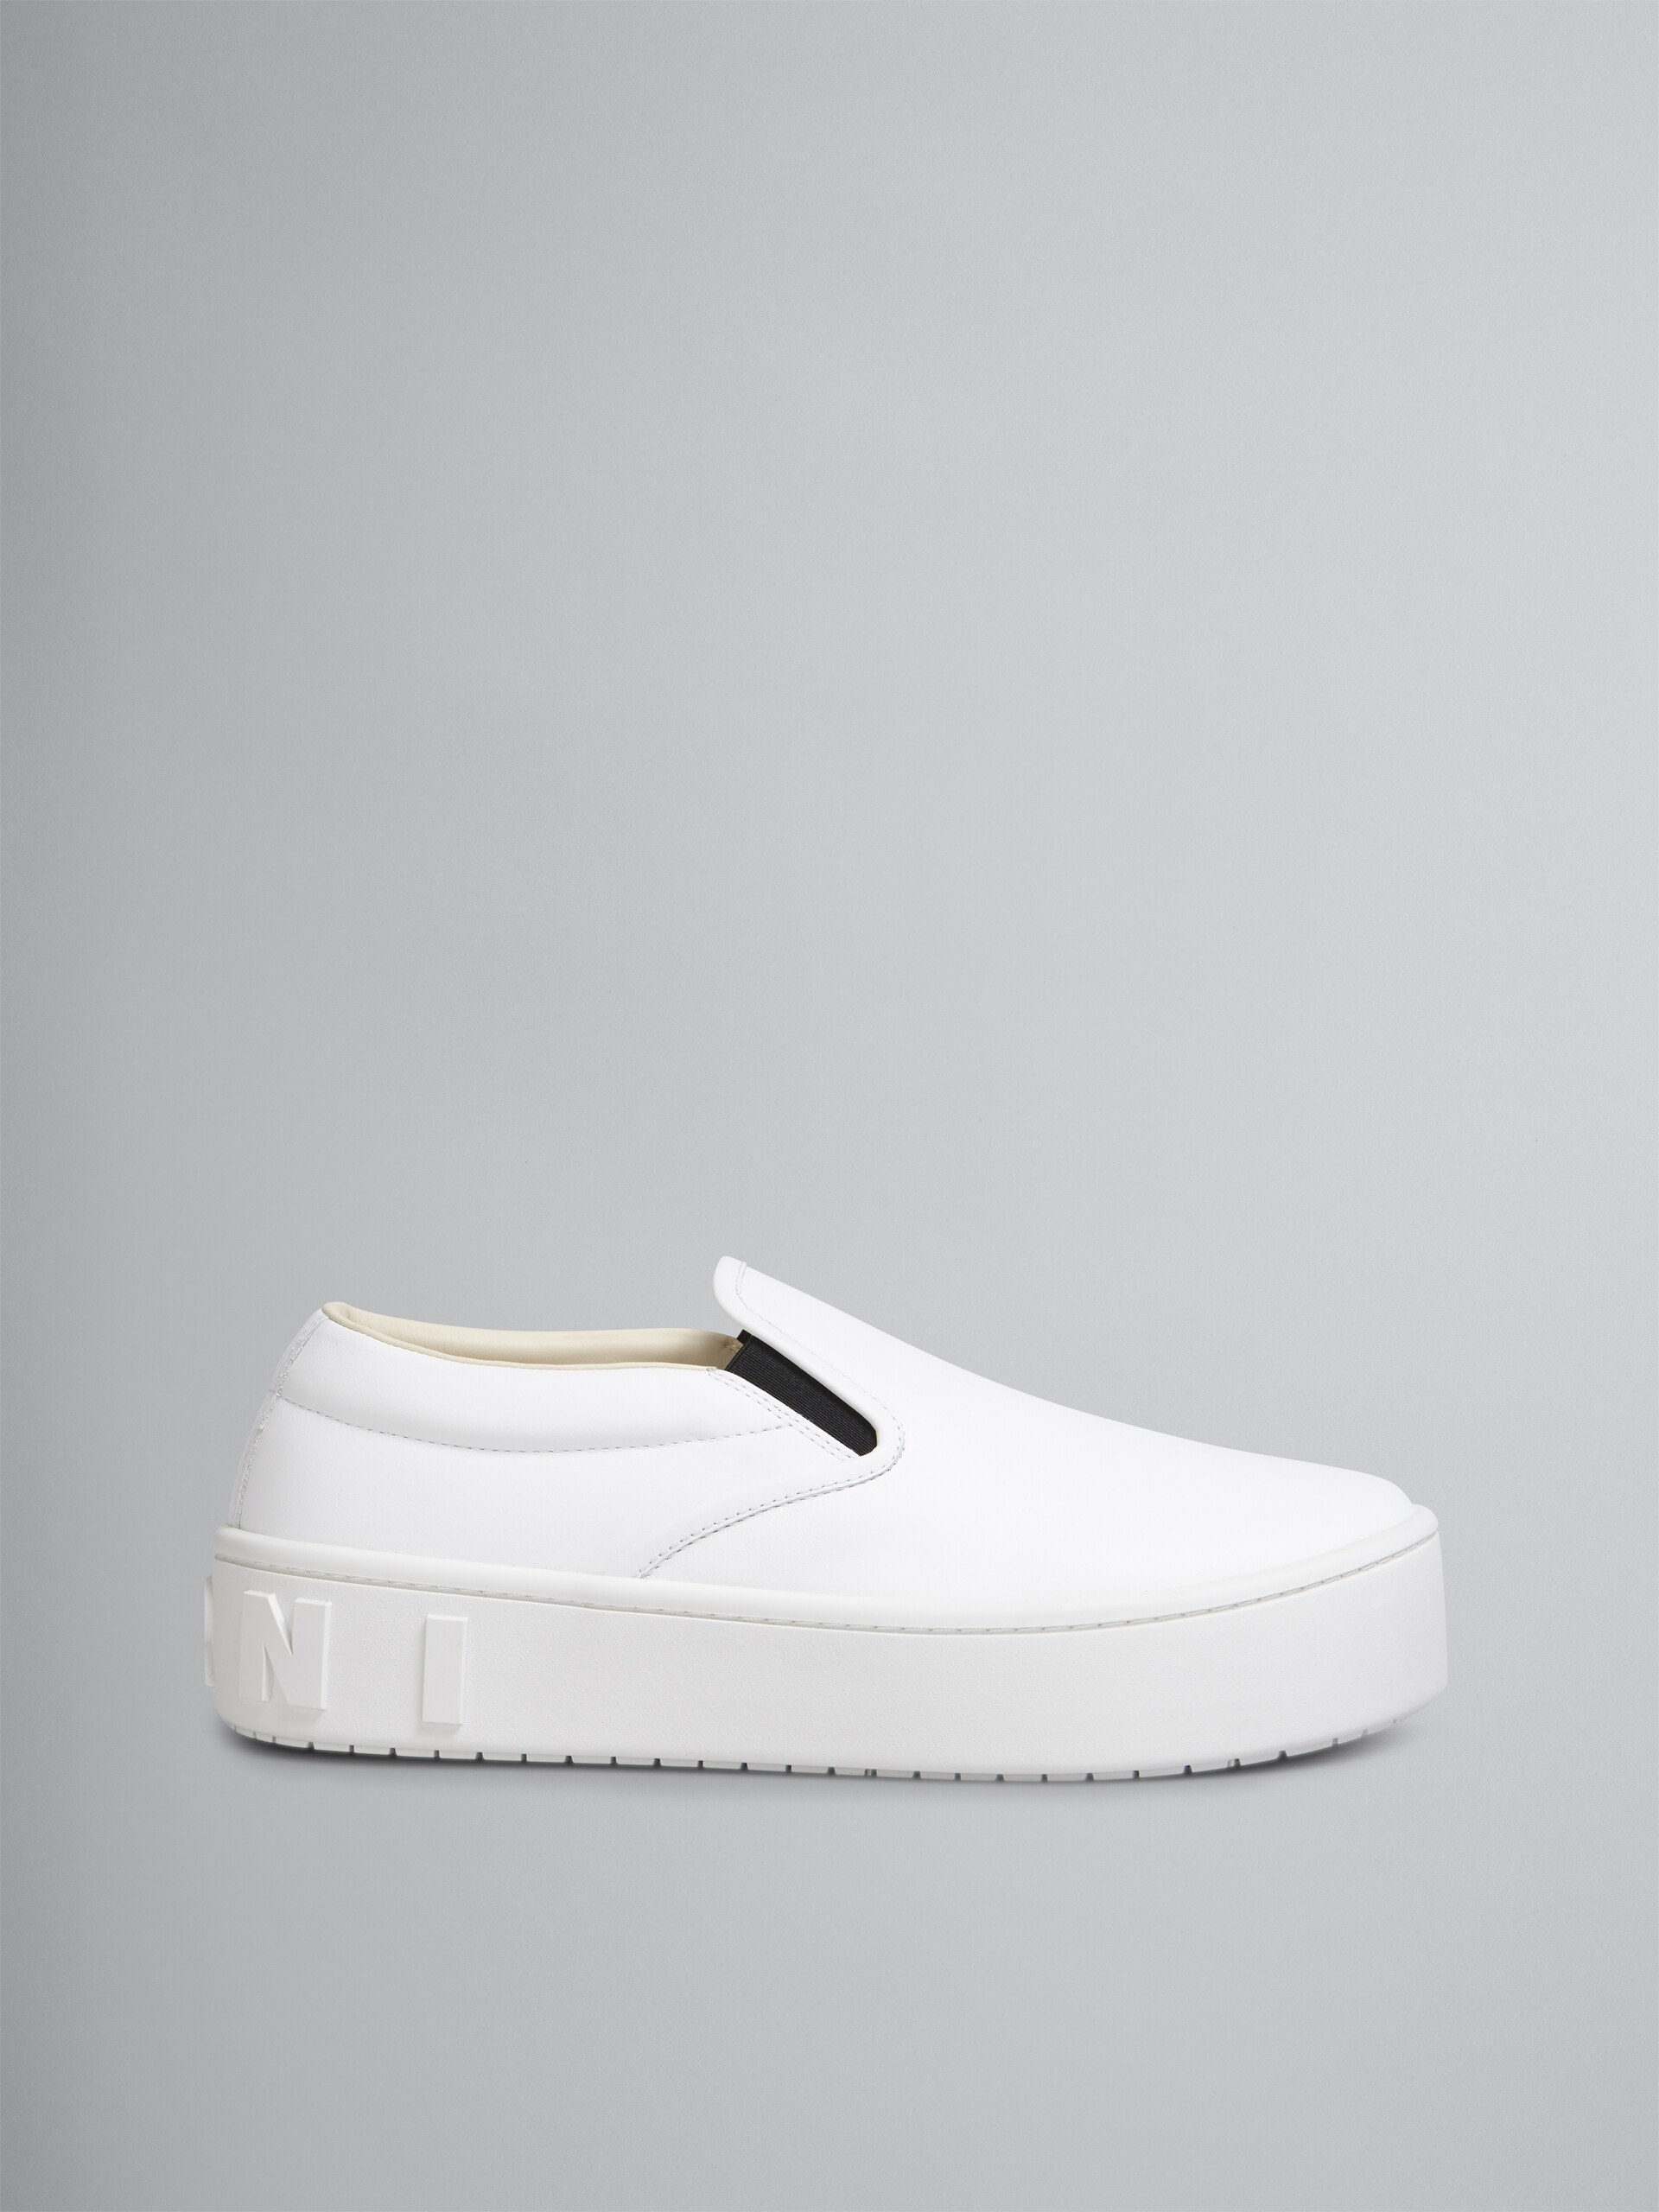 Calfskin slip-on sneaker with maxi logo on the heel - Sneakers - Image 1